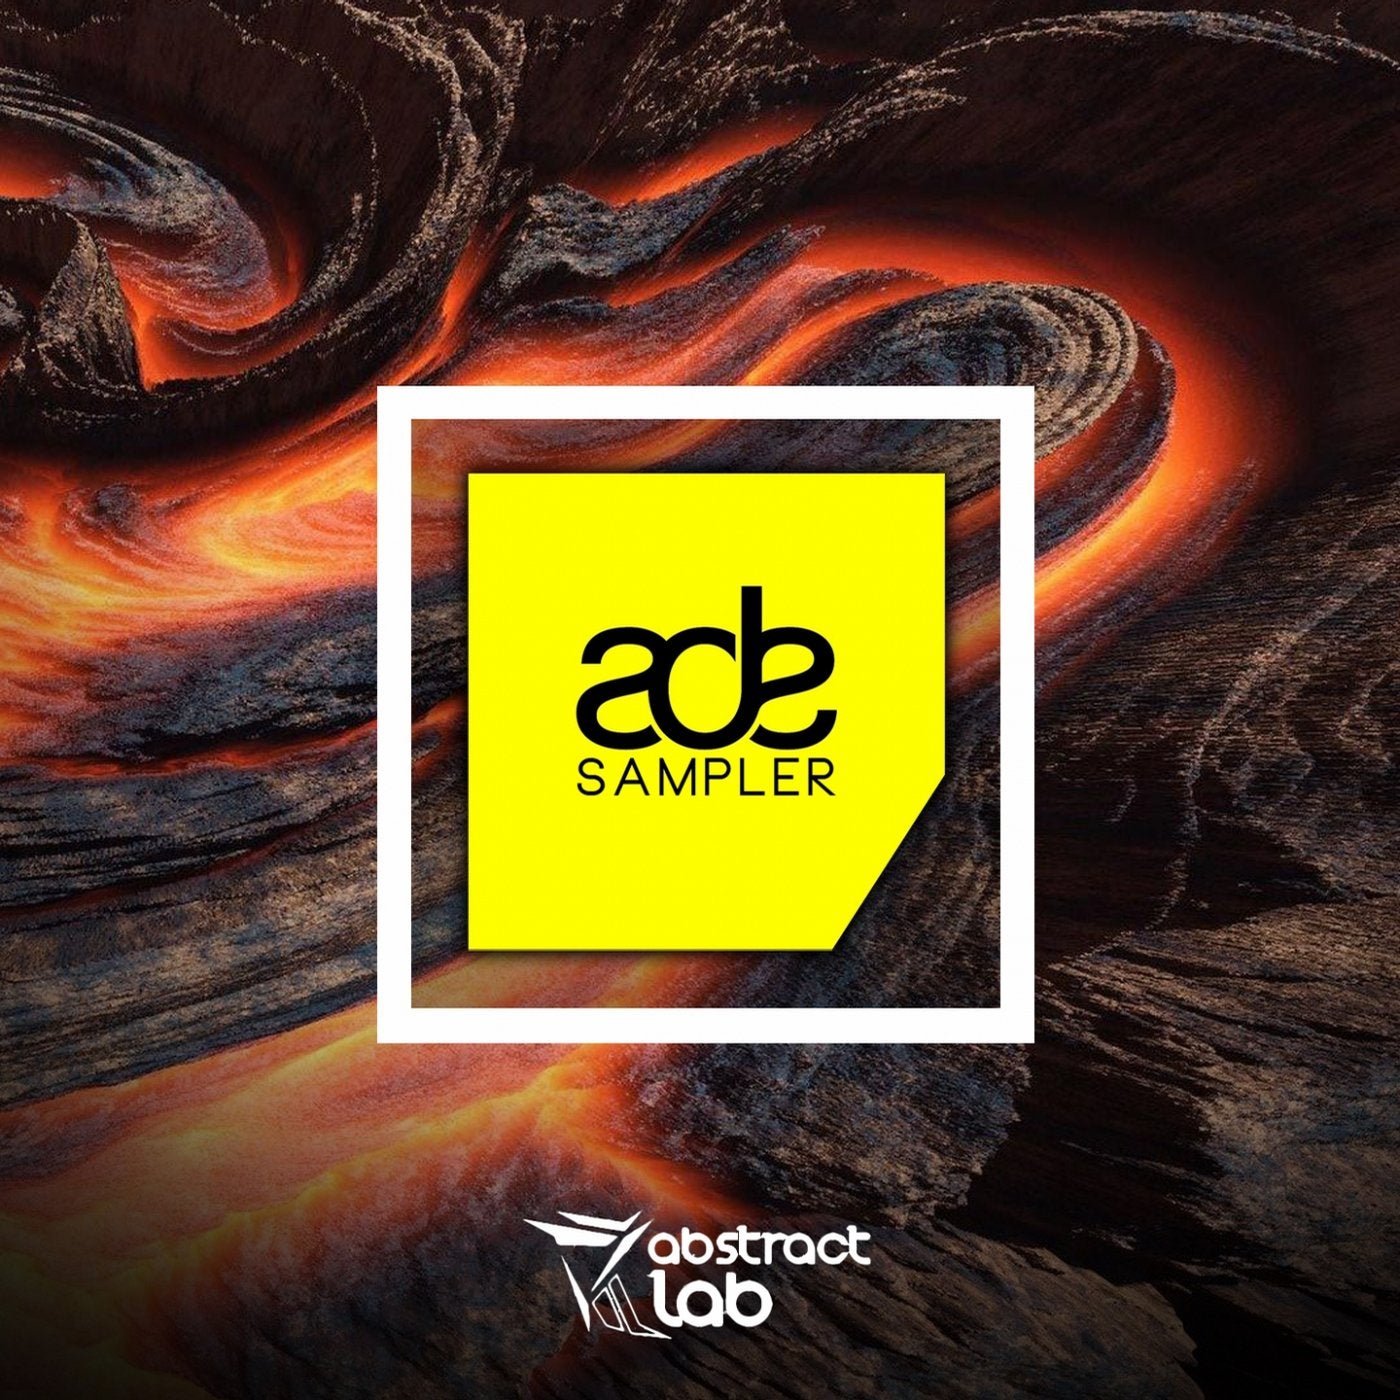 Abstract Lab ADE Sample 2016